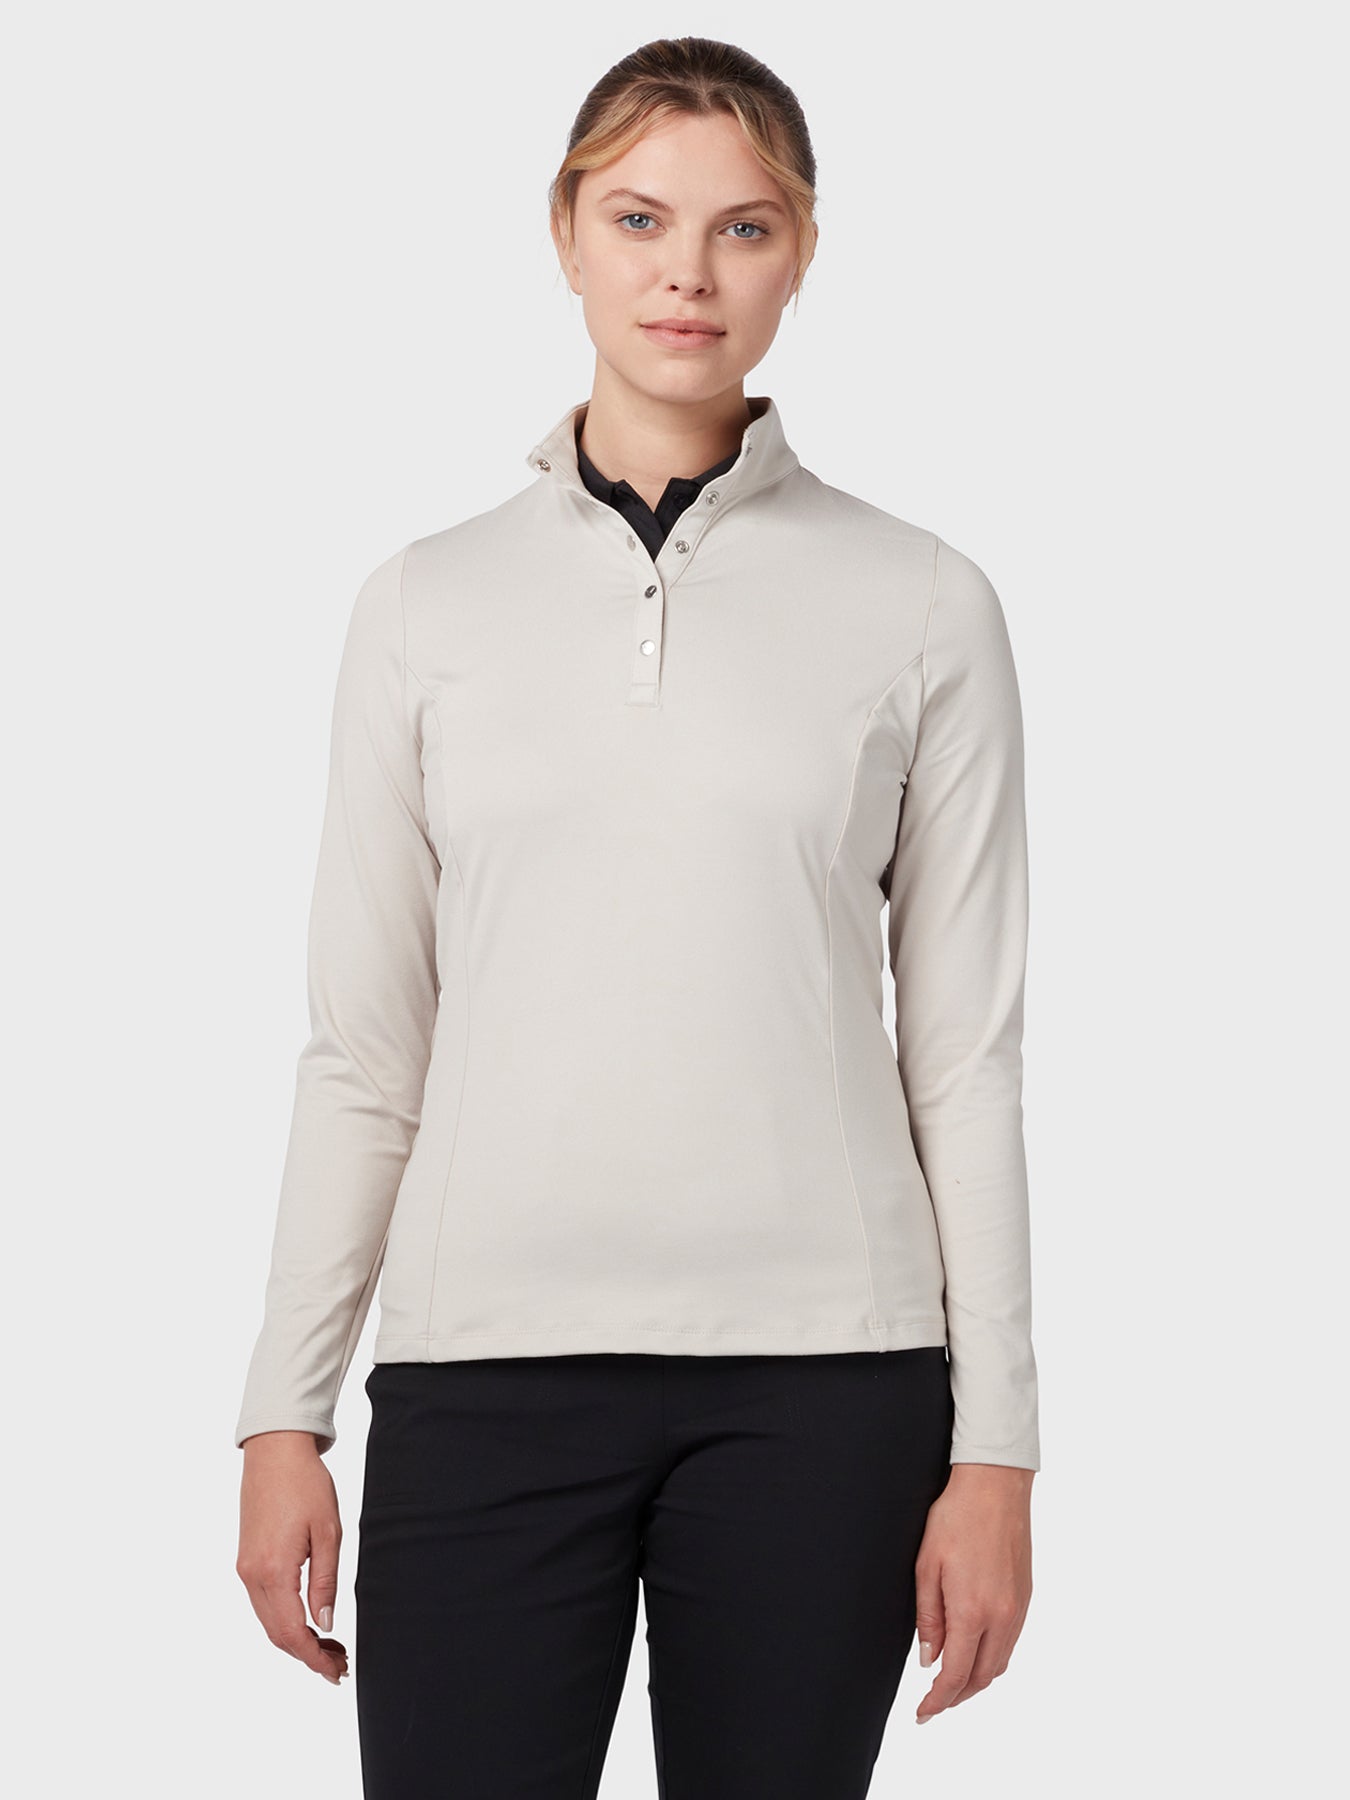 View Womens Thermal Longsleeve Fleece Back Jersey Polo In Chateau Grey information